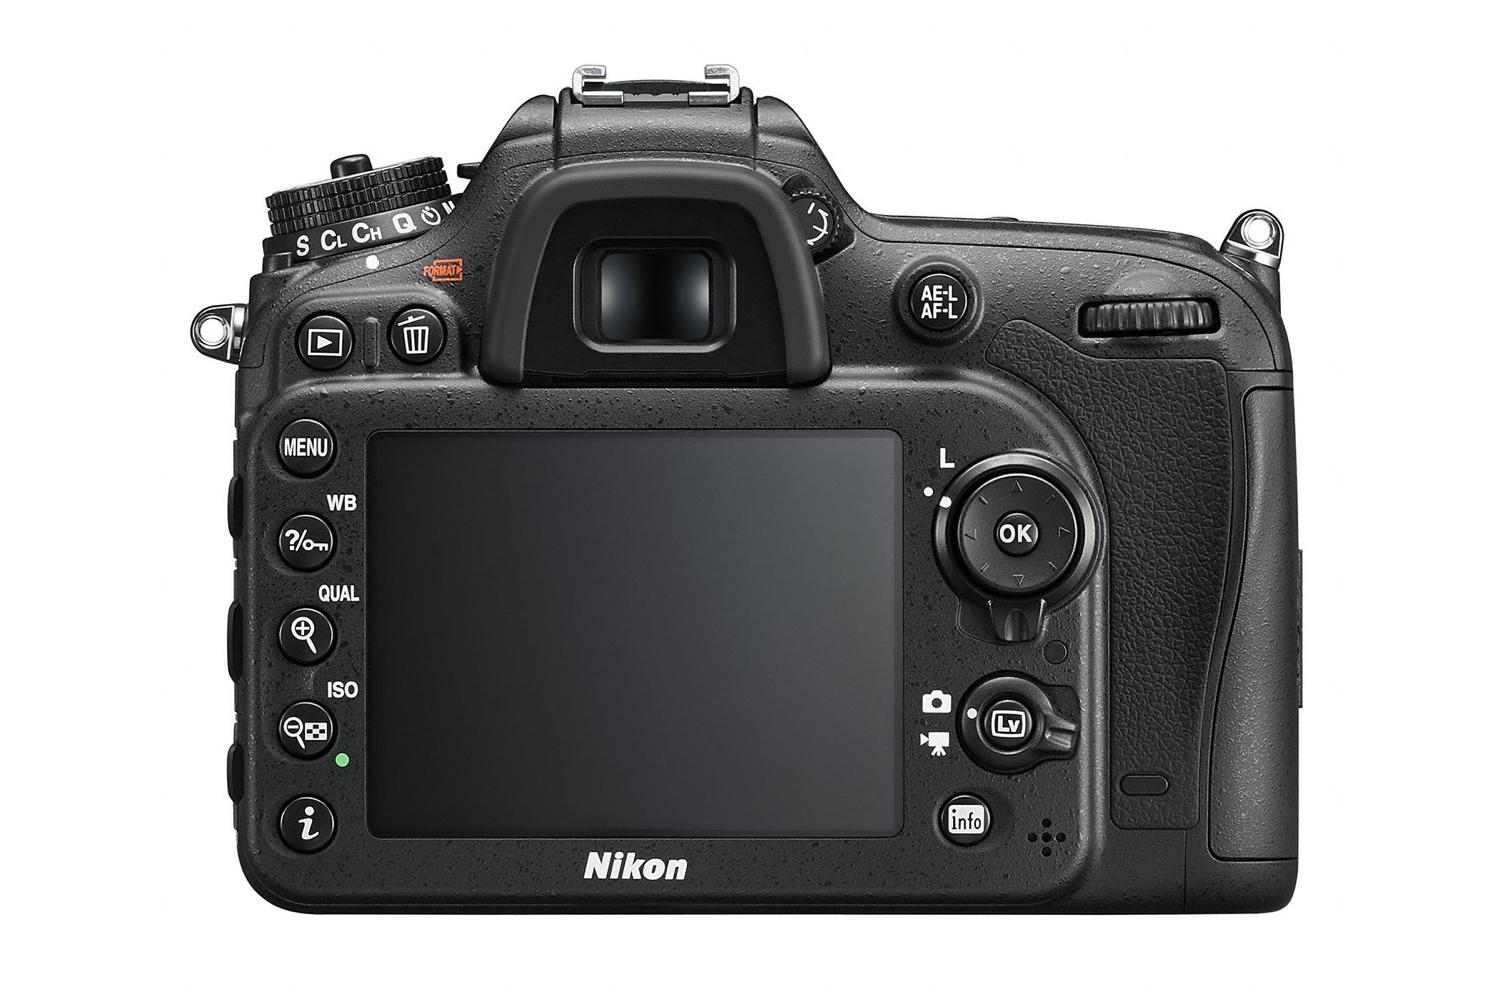 nikon pumps up its enthusiast dslr with enhanced image and movie capture d7200 back